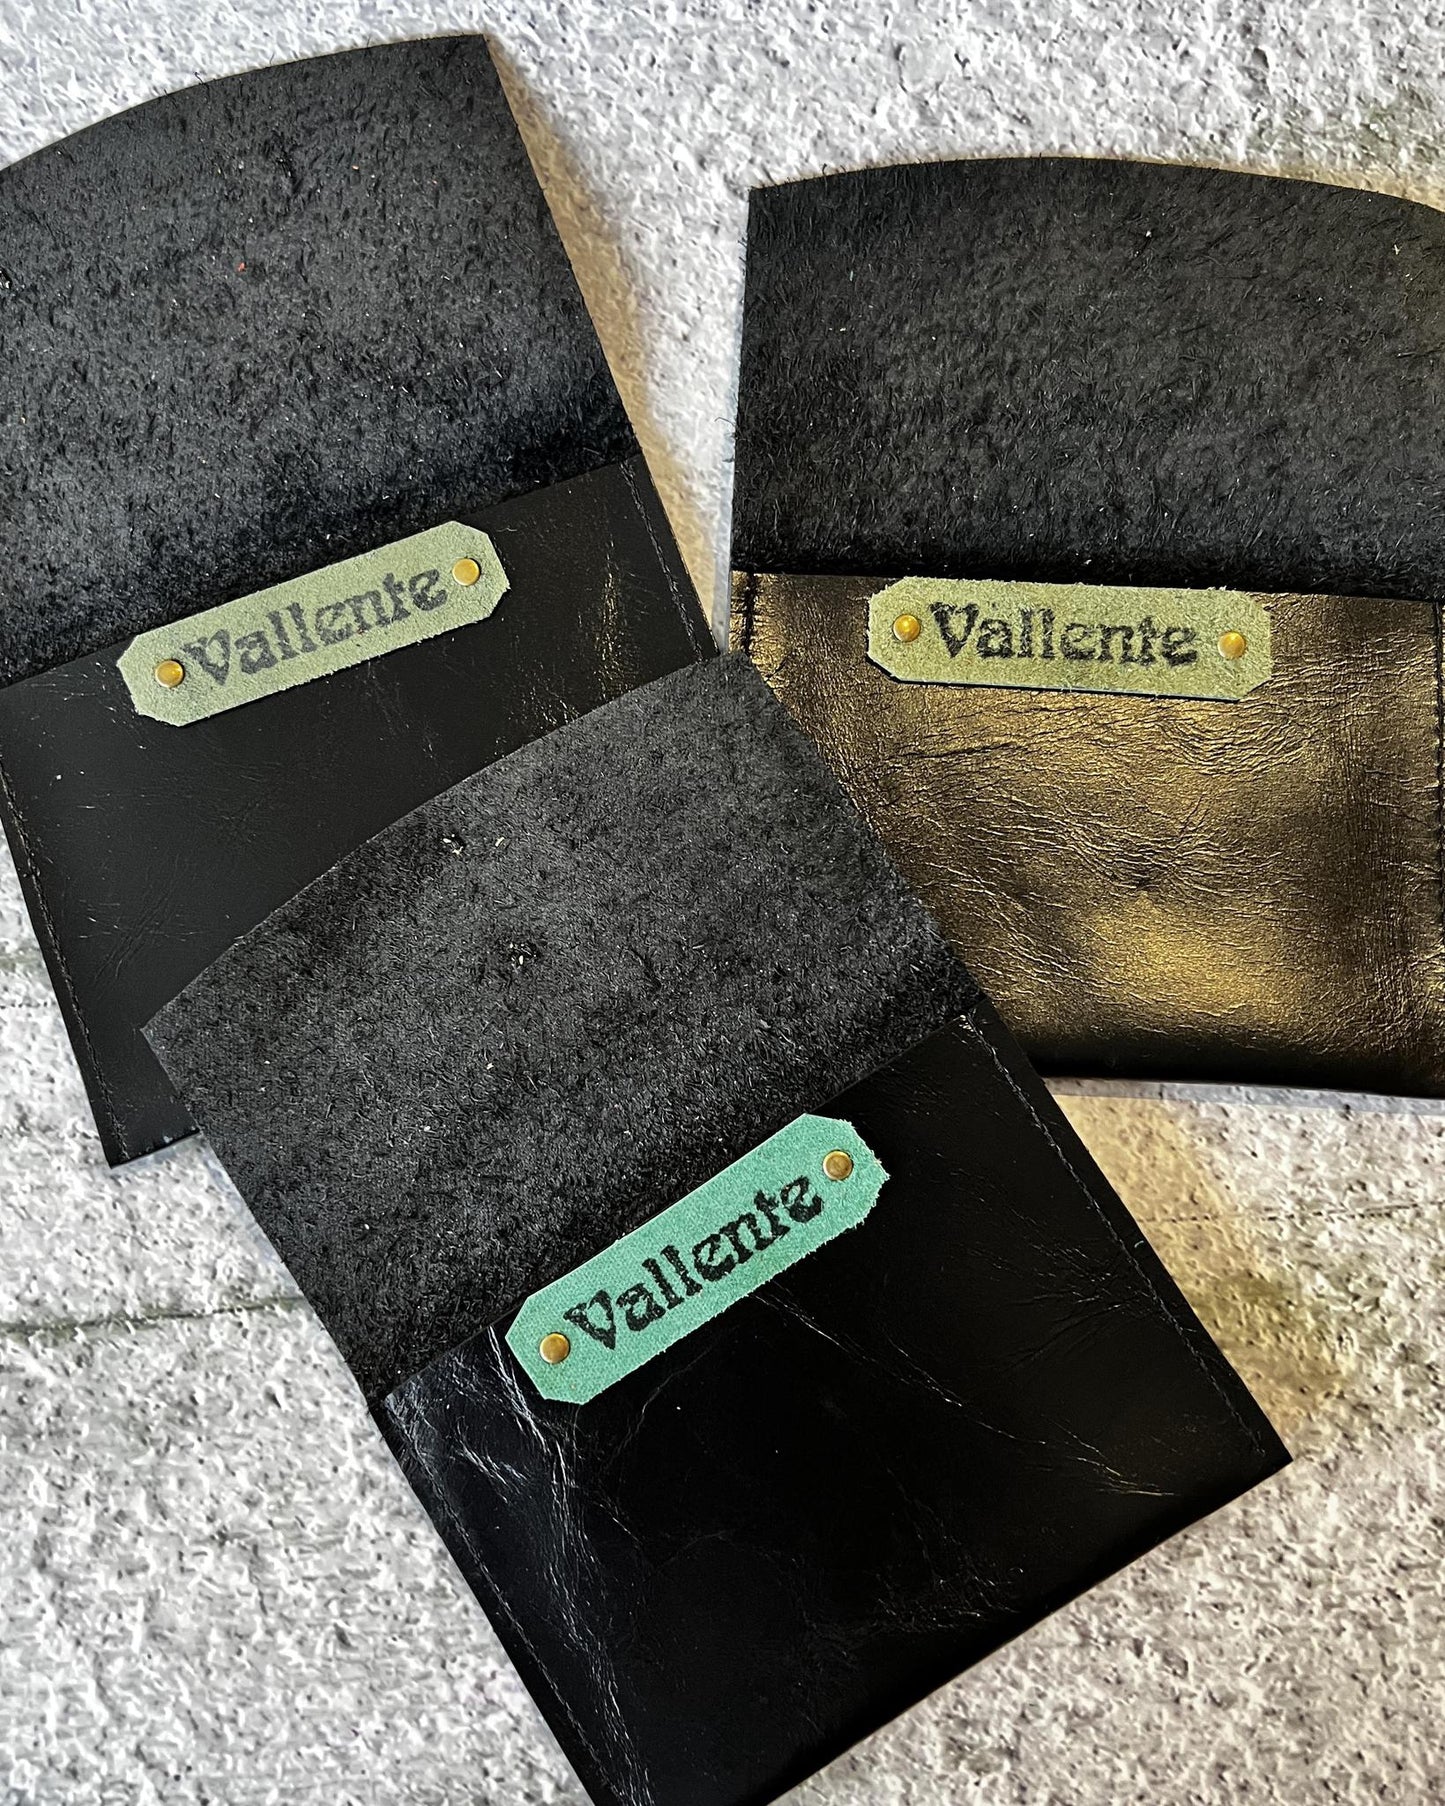 Vallente Leather Lil' Stamped Wallet Black with Bunny